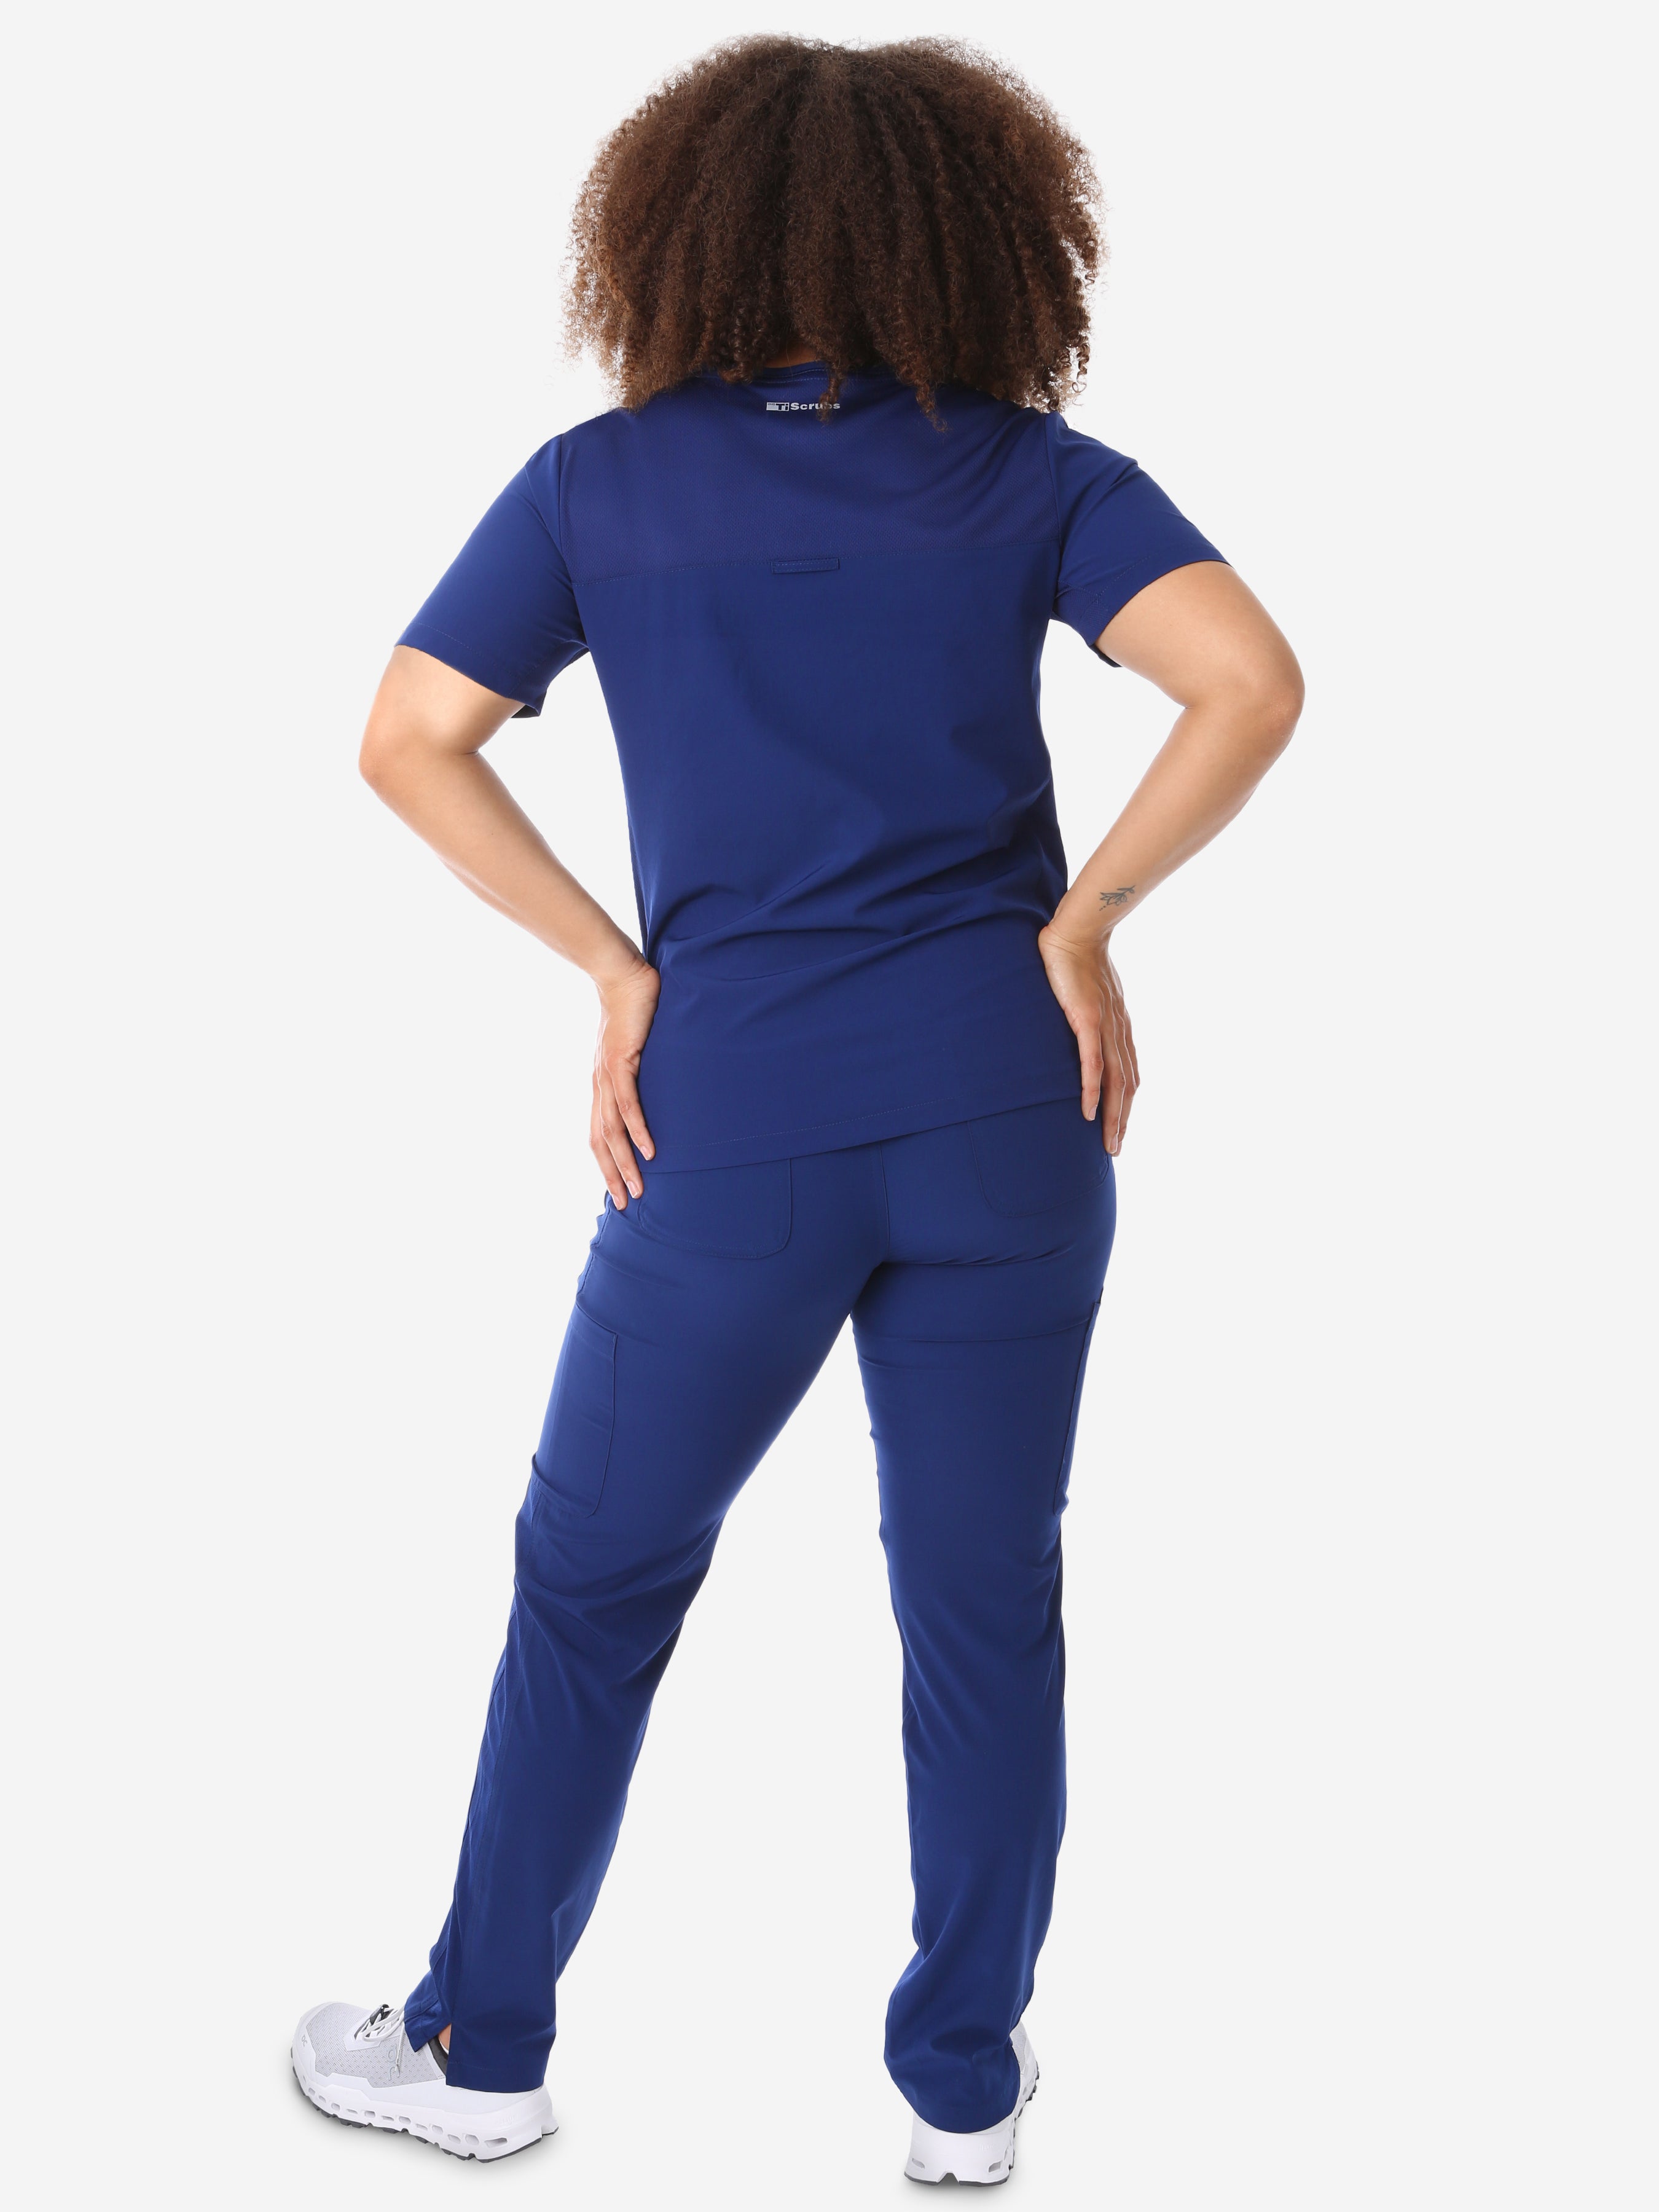 Women&#39;s Four-Pocket Scrub Top Navy Blue Full Body Back  View with 9-Pocket Pants